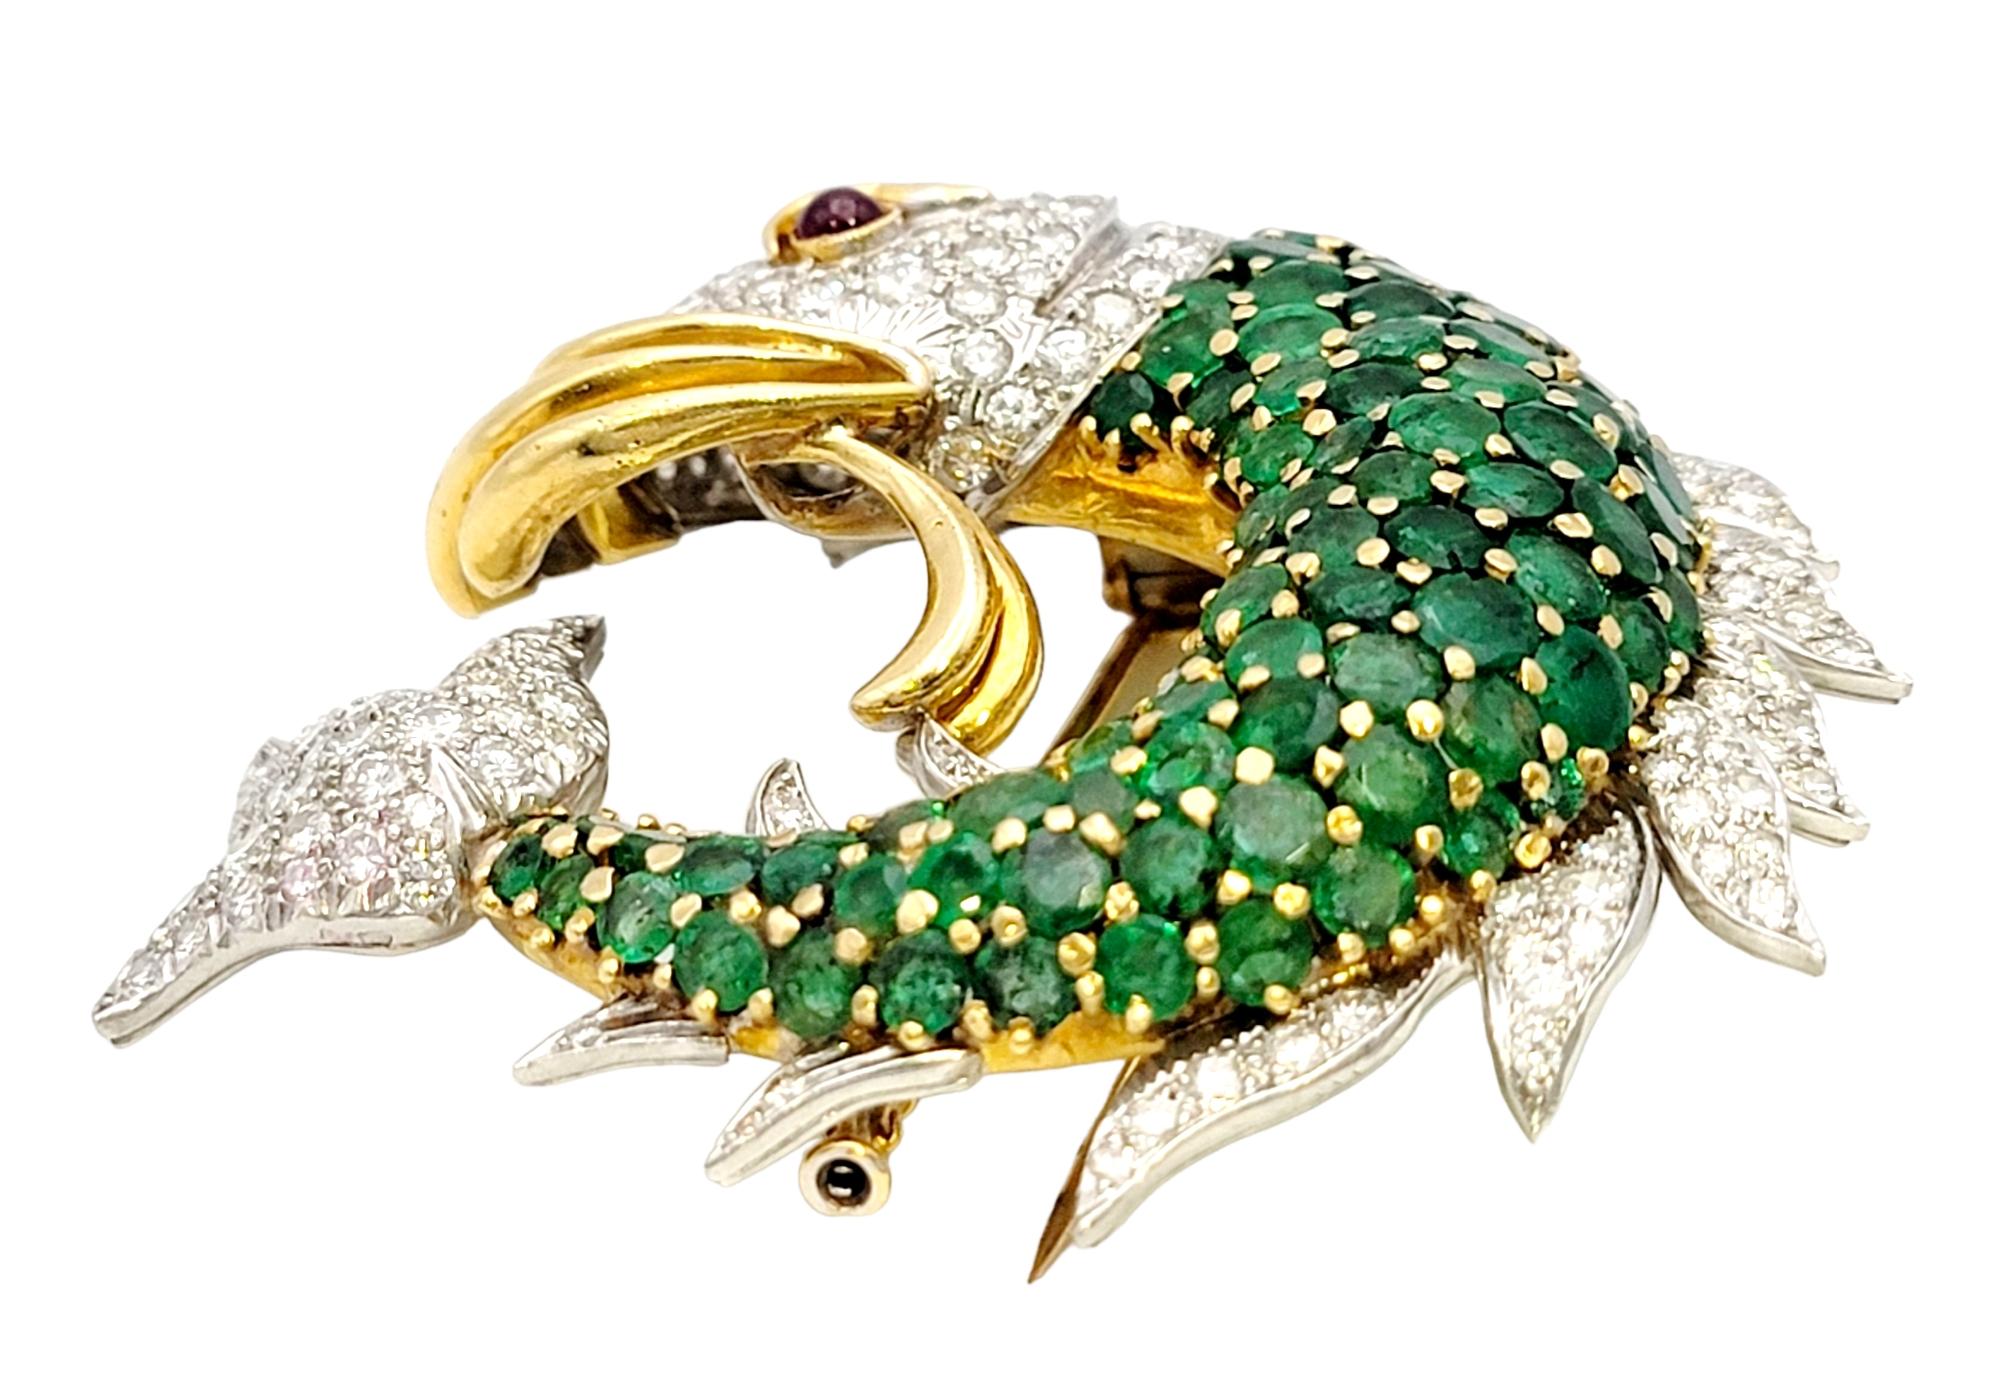 20.50 Carats Total Emerald, Diamond and Ruby Fish Brooch in 18 Karat Gold  In Good Condition For Sale In Scottsdale, AZ